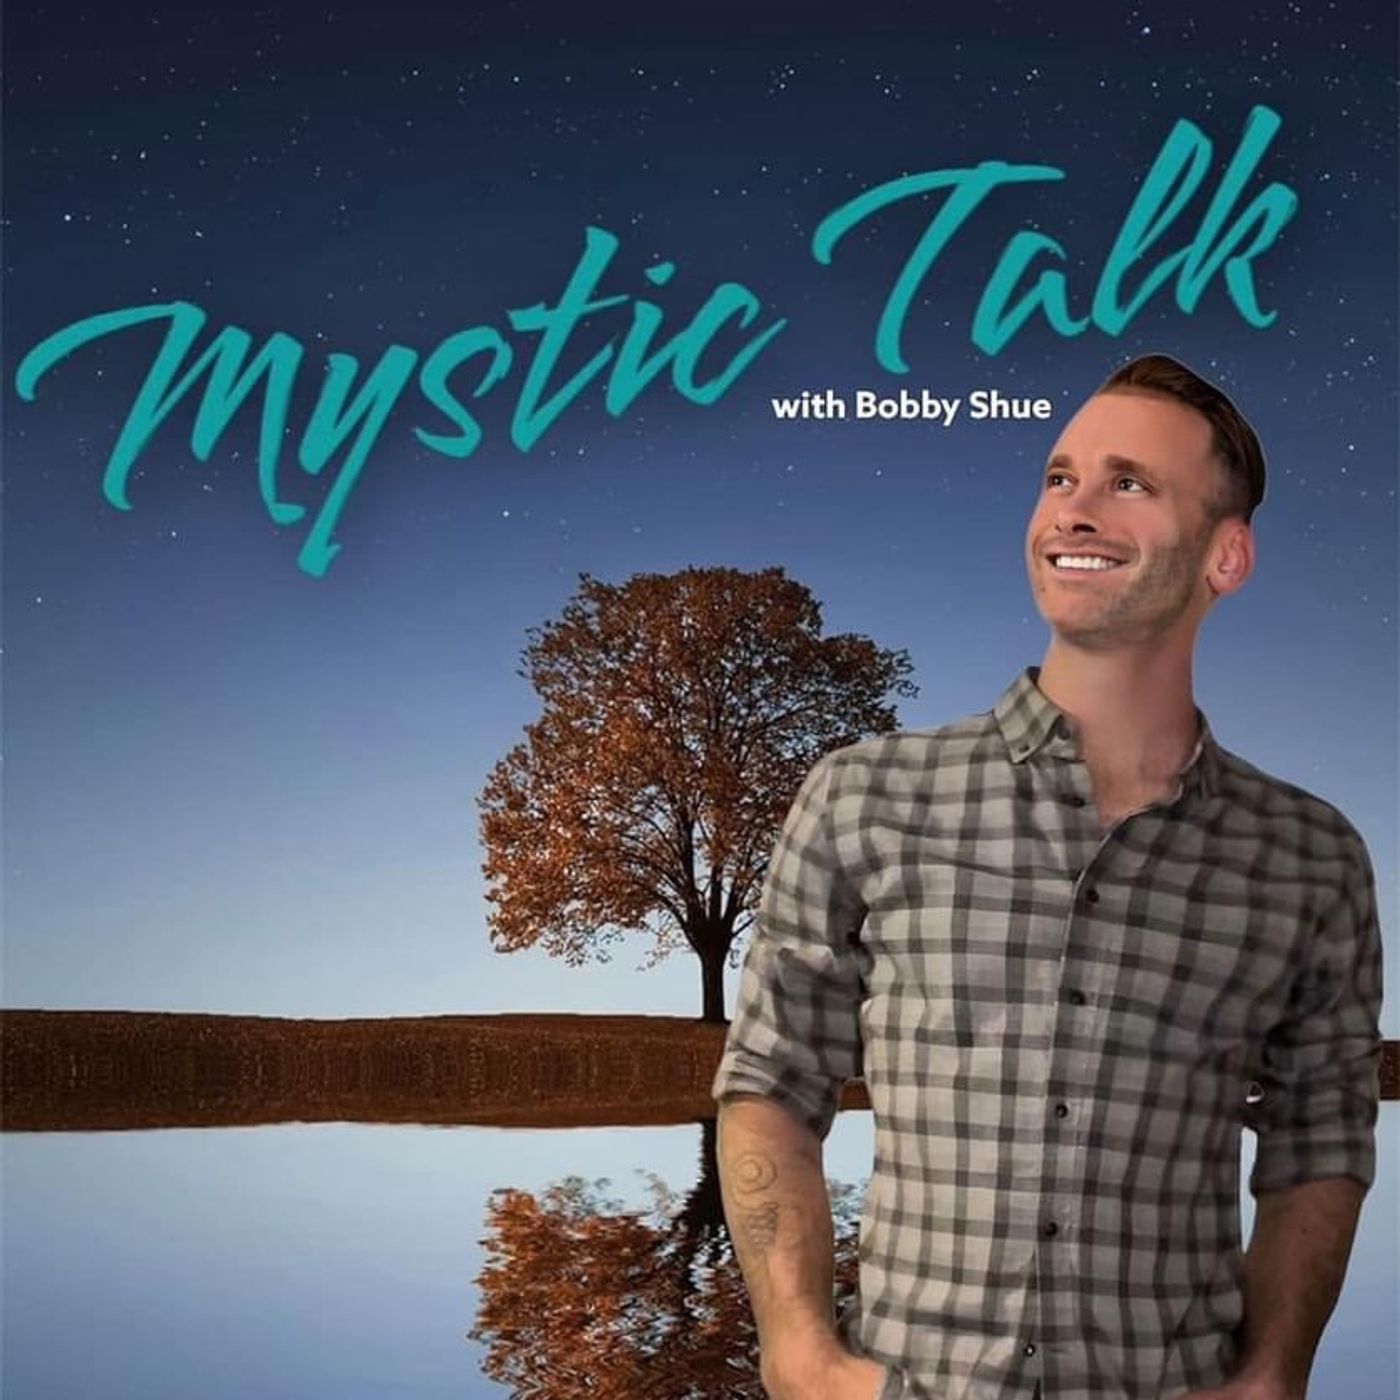 163: Guest Chat with Bobby Shue (Author and Host of ”Mystic Talk” Podcast)